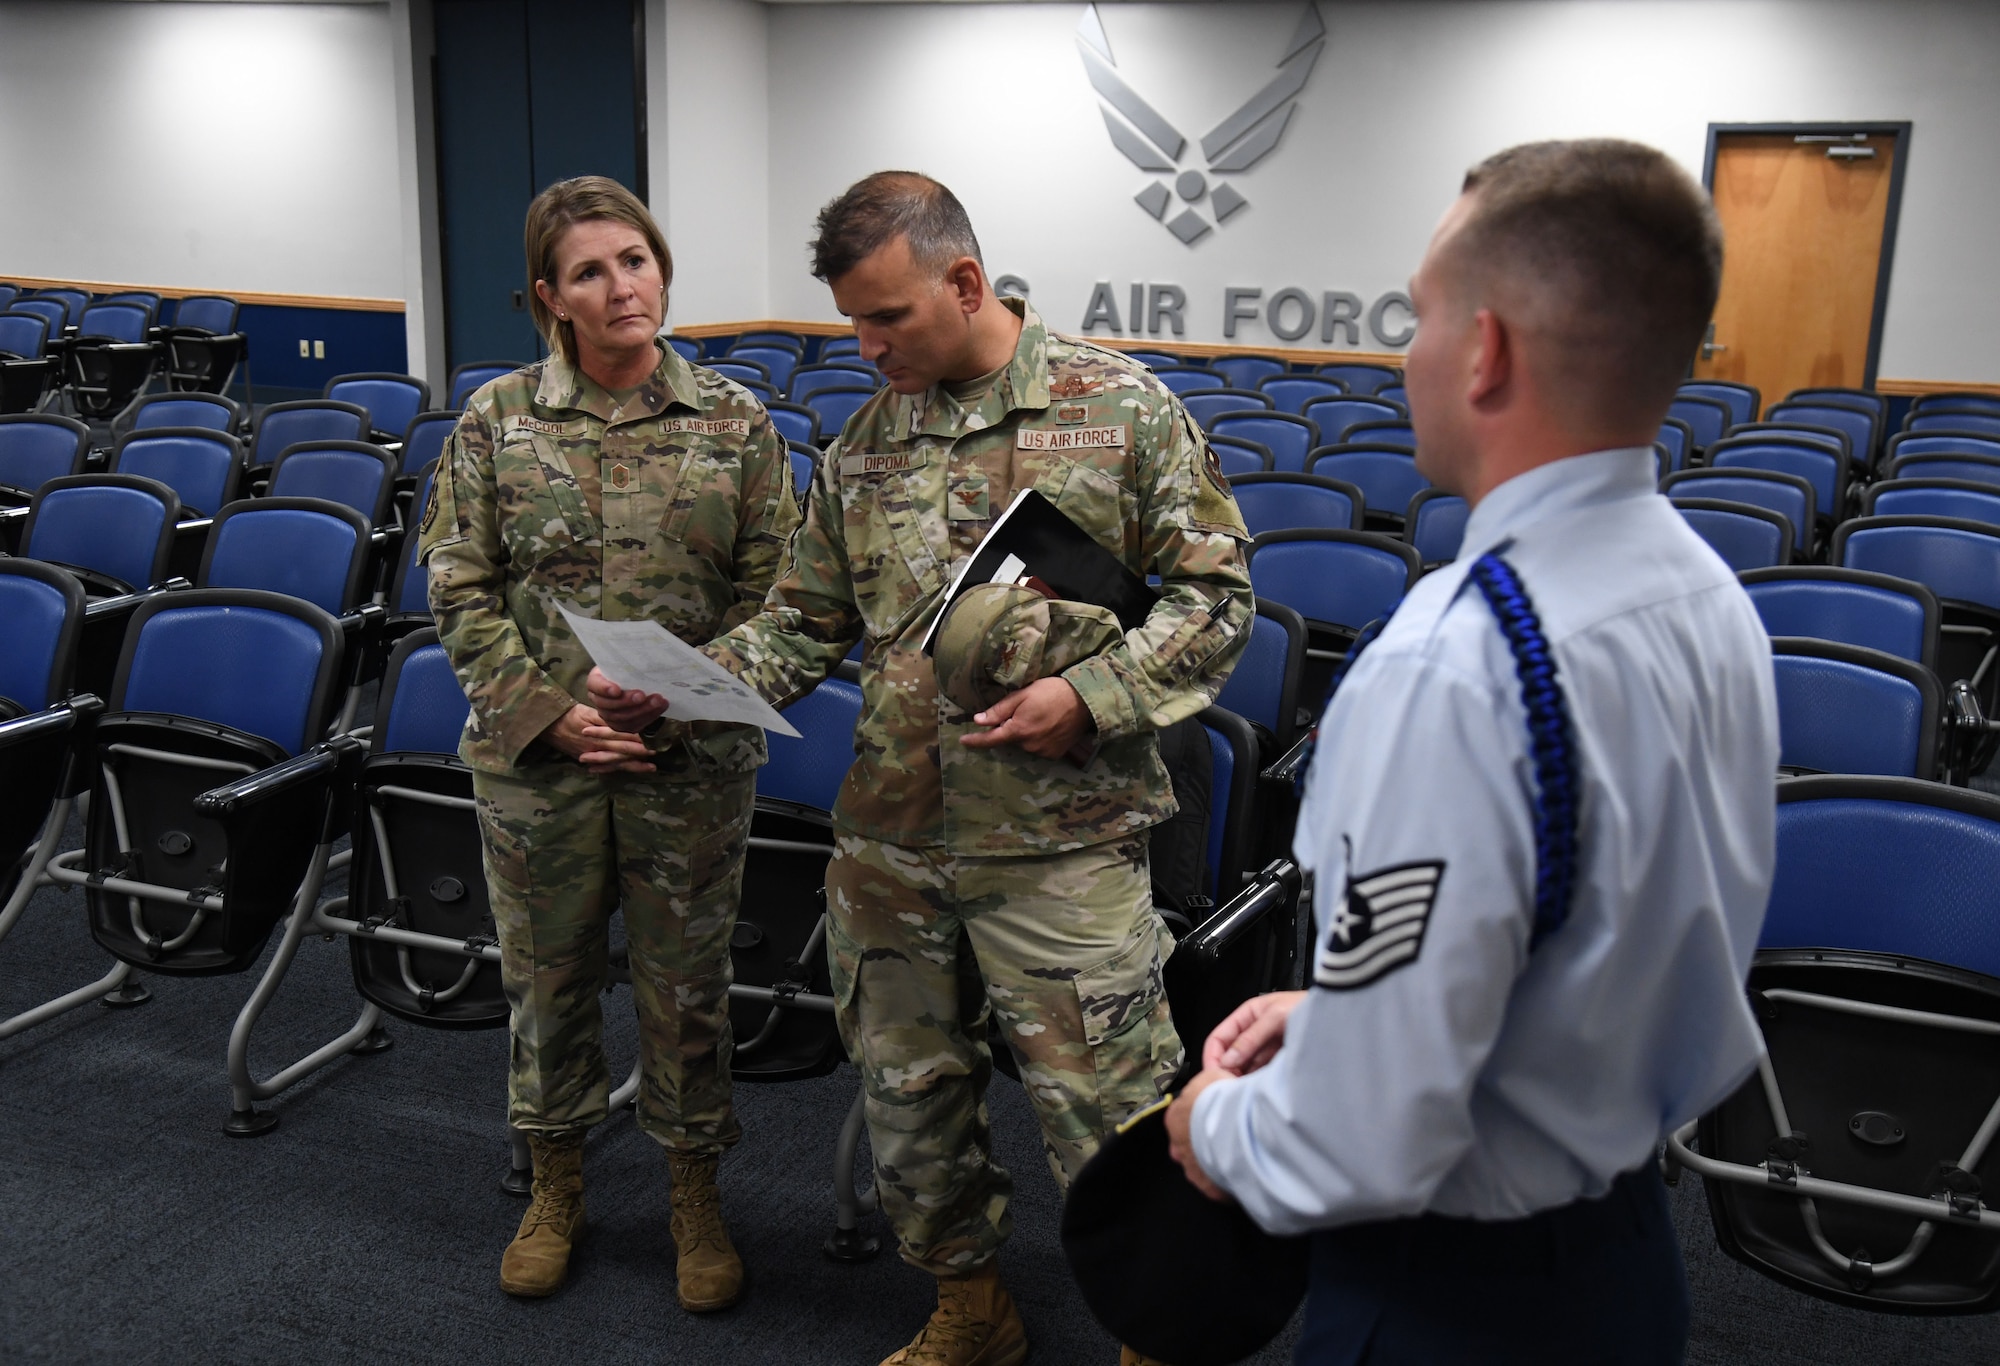 U.S. Air Force Tech. Sgt. Robert Watts, 81st Training Support Squadron military training leader, provides a tour of the Levitow Training Support Facility to Chief Master Sgt. Kathleen McCool, Second Air Force command chief, and Col. Nicholas Dipoma, Second Air Force vice commander, during an immersion tour at Keesler Air Force Base, Mississippi, July 29, 2022. The tour also included the 334th Training Squadron air traffic control simulator and the 81st Medical Group clinical research lab. (U.S. Air Force photo by Kemberly Groue)